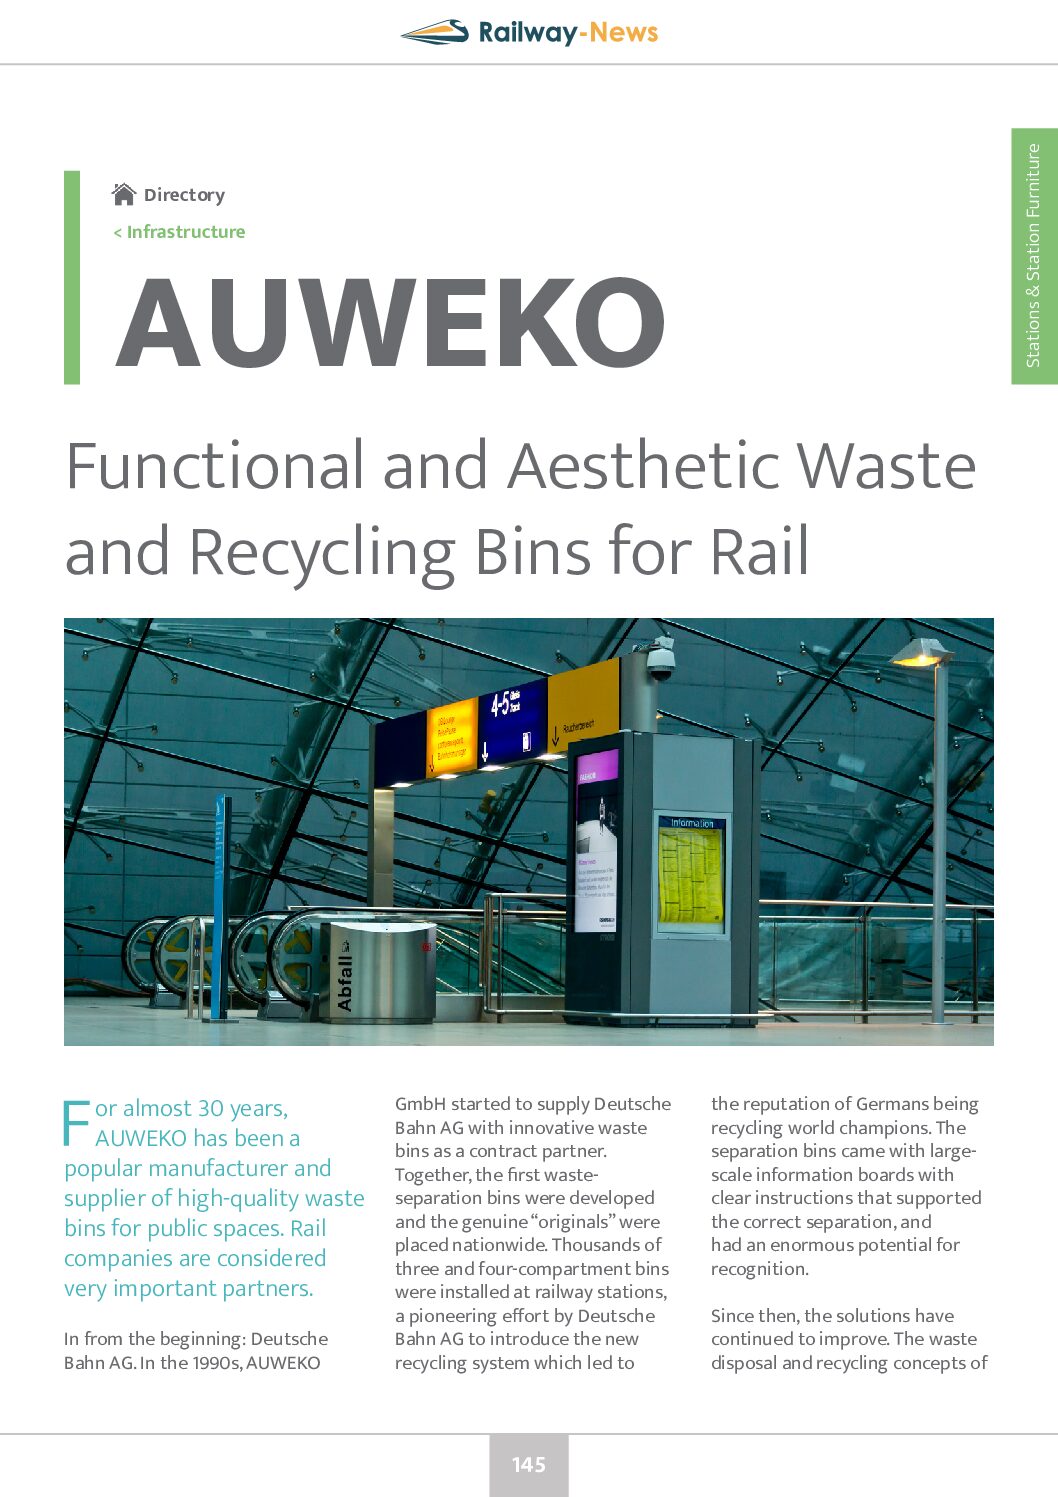 AUWEKO – Functional and Aesthetic Waste and Recycling Bins for Rail